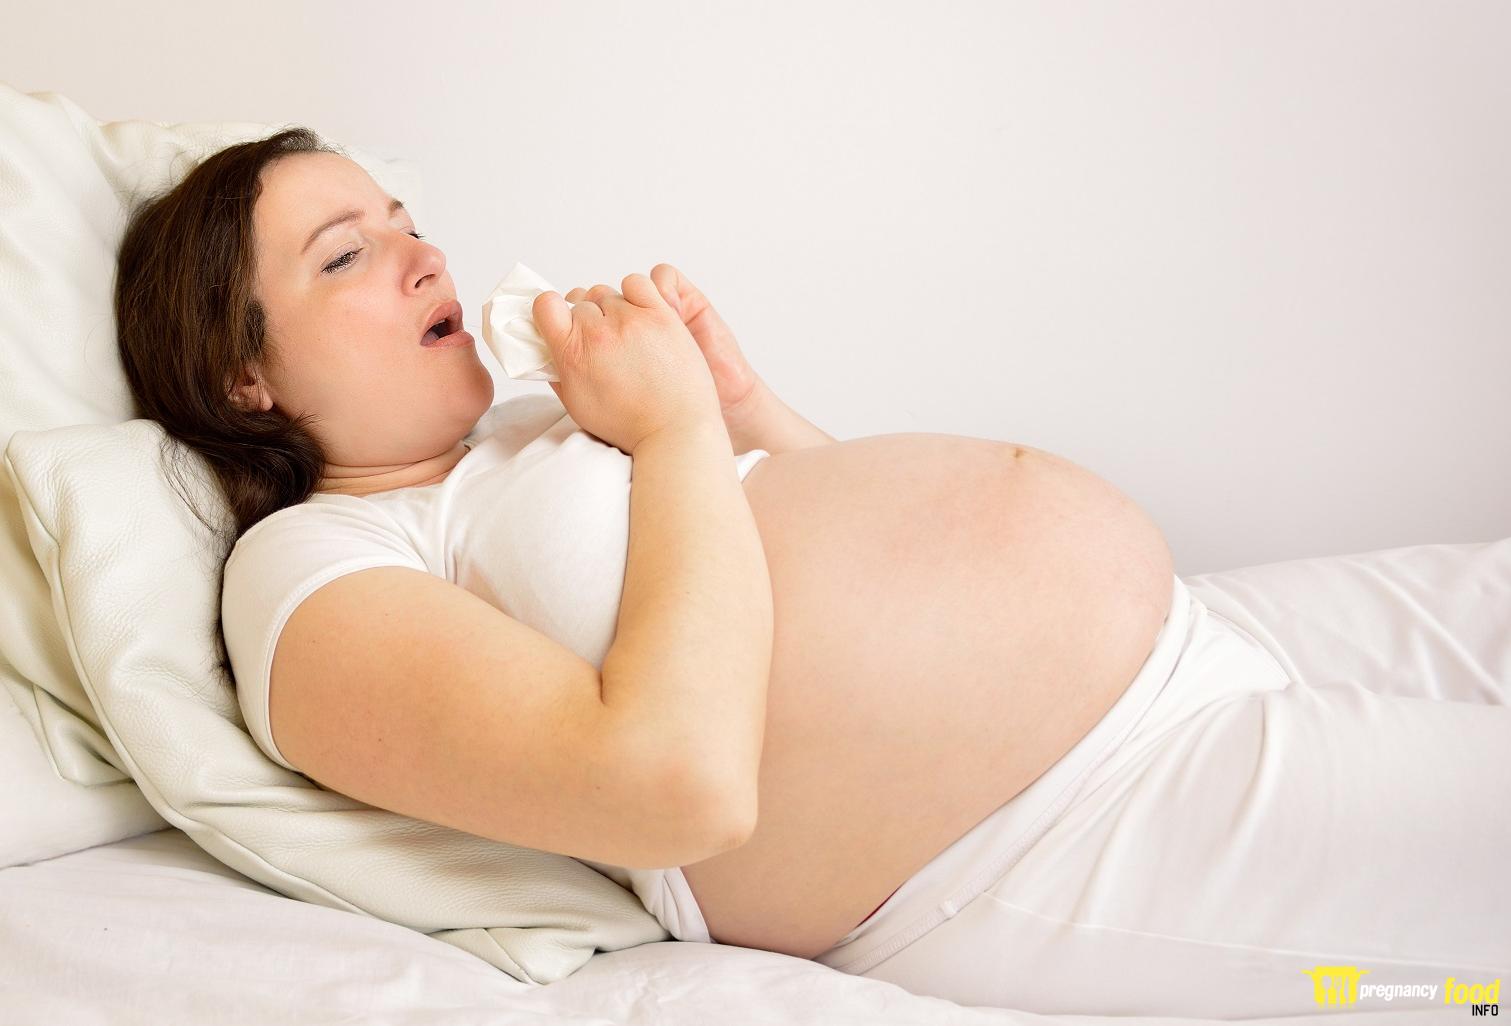 Are cough drops safe during pregnancy?